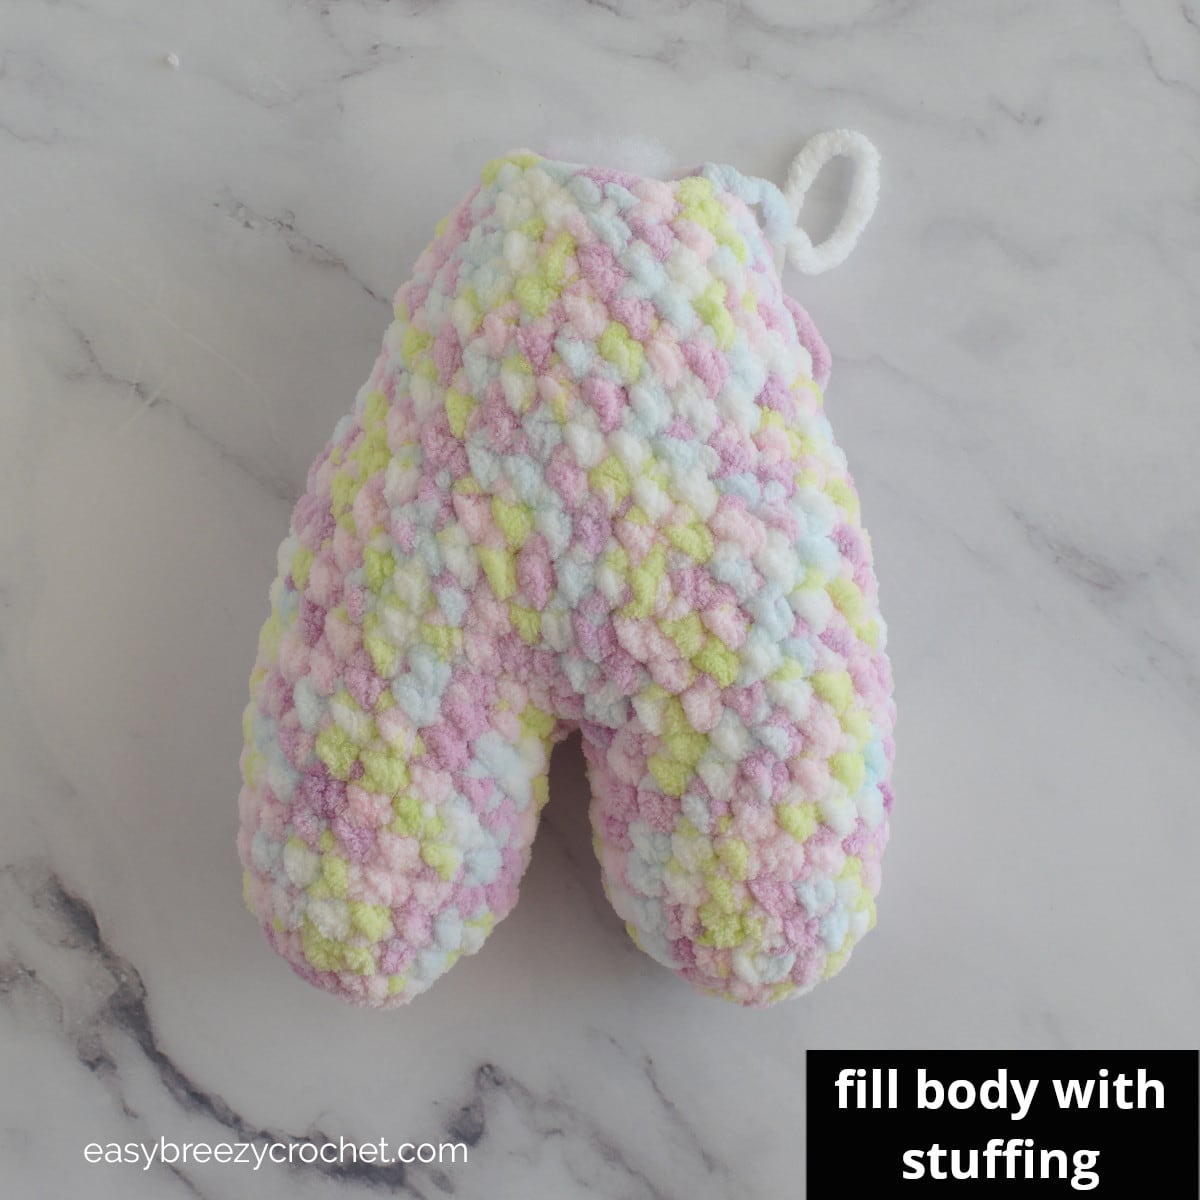 Crochet bunny body filled with stuffing.